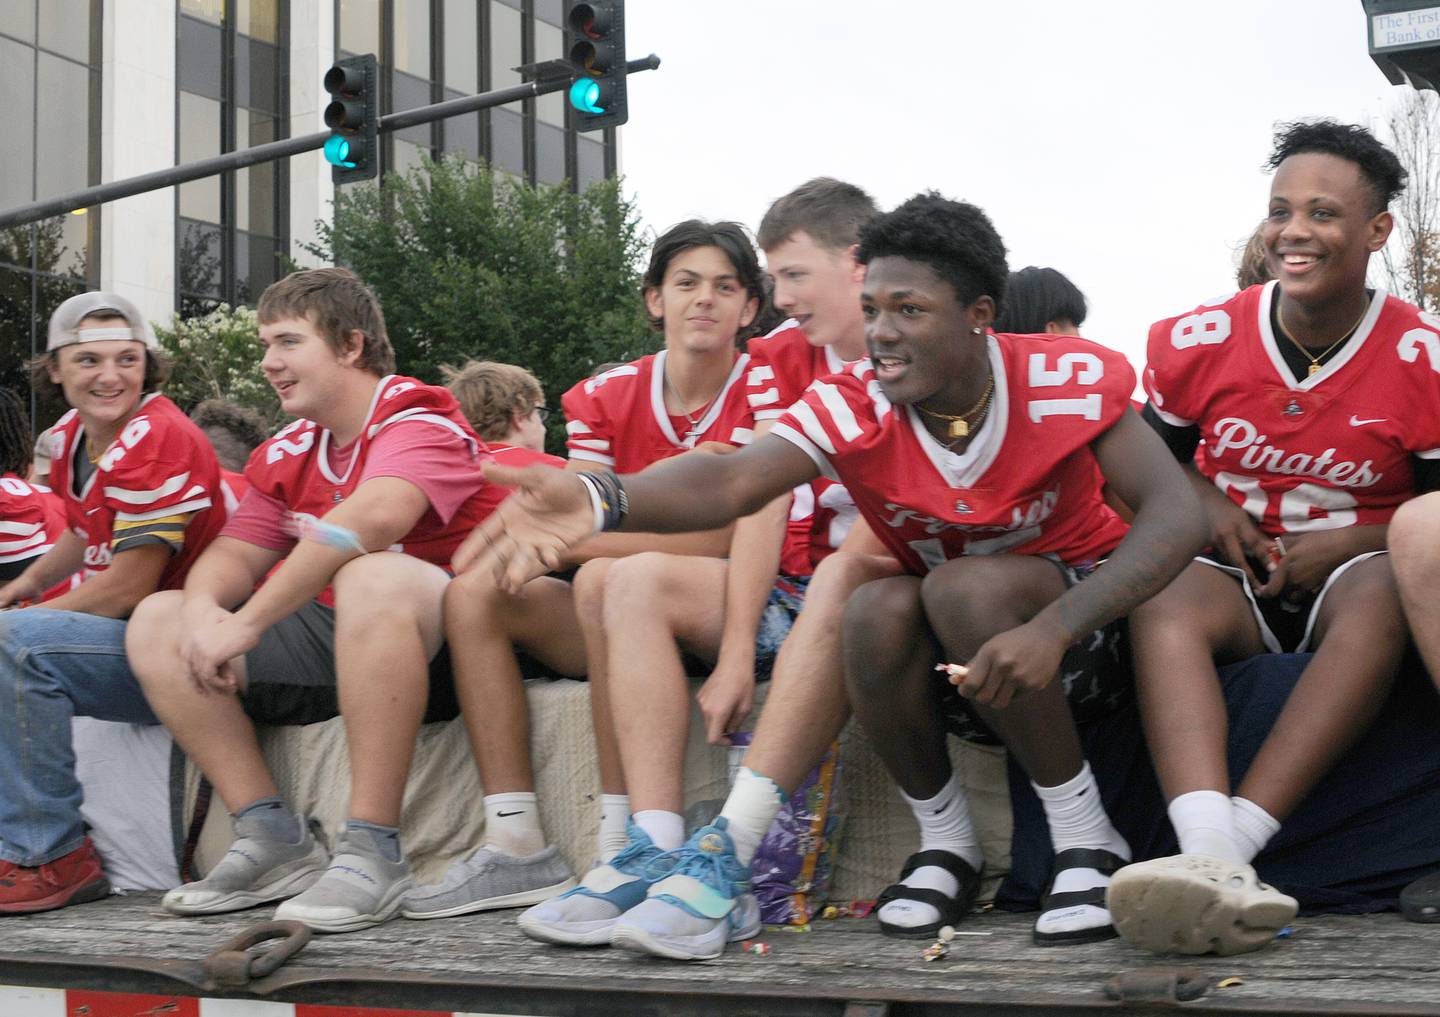 The Ottawa High School varsity football team tosses candy to the crowd Wednesday, Sept. 21, 2022, along LaSalle Street in Ottawa during the school’s homecoming parade.